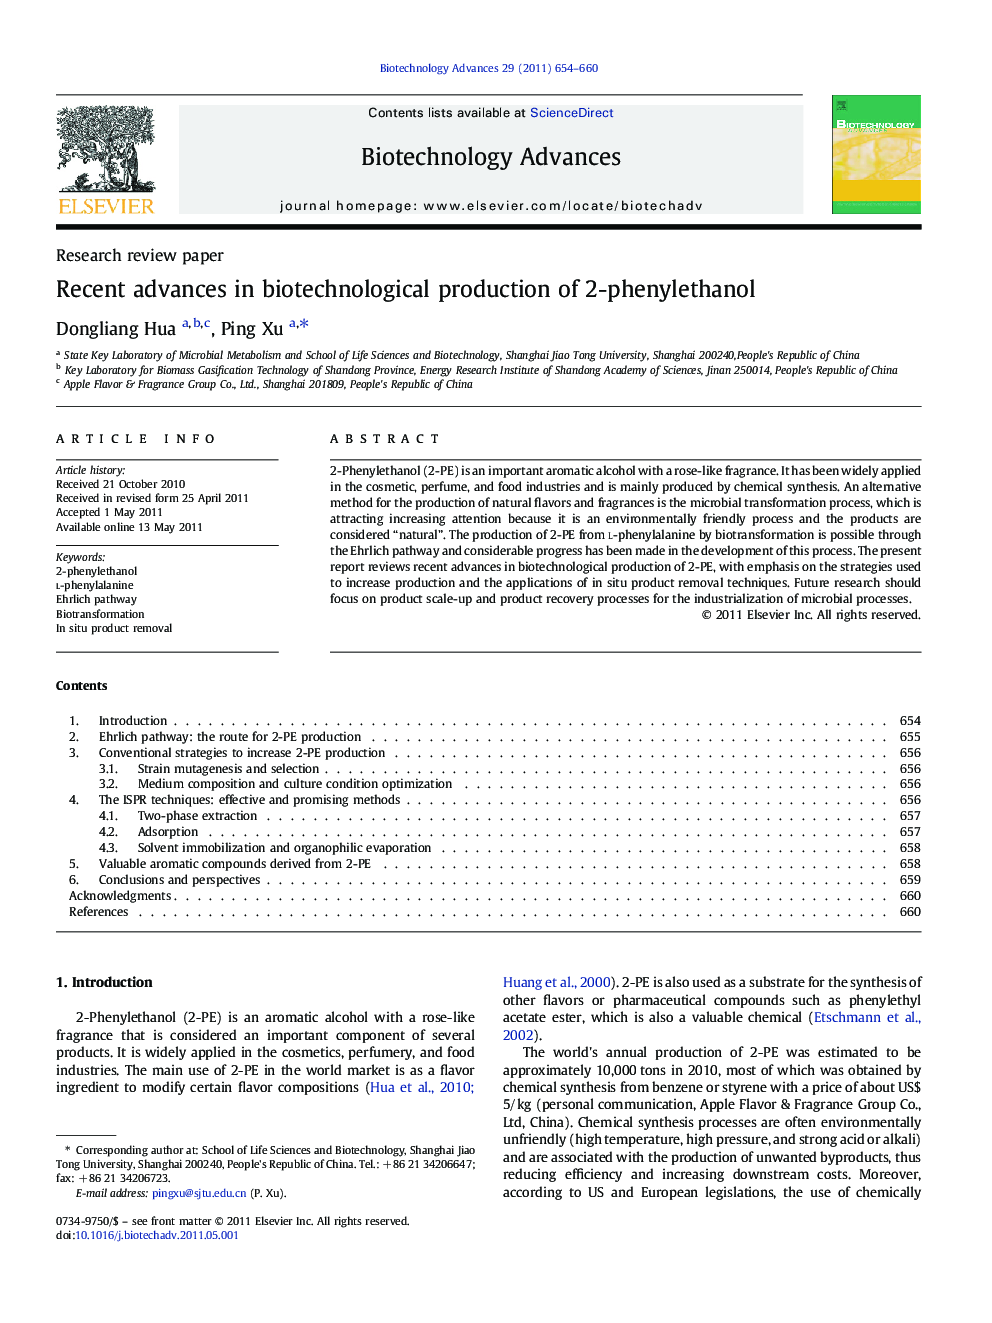 Recent advances in biotechnological production of 2-phenylethanol